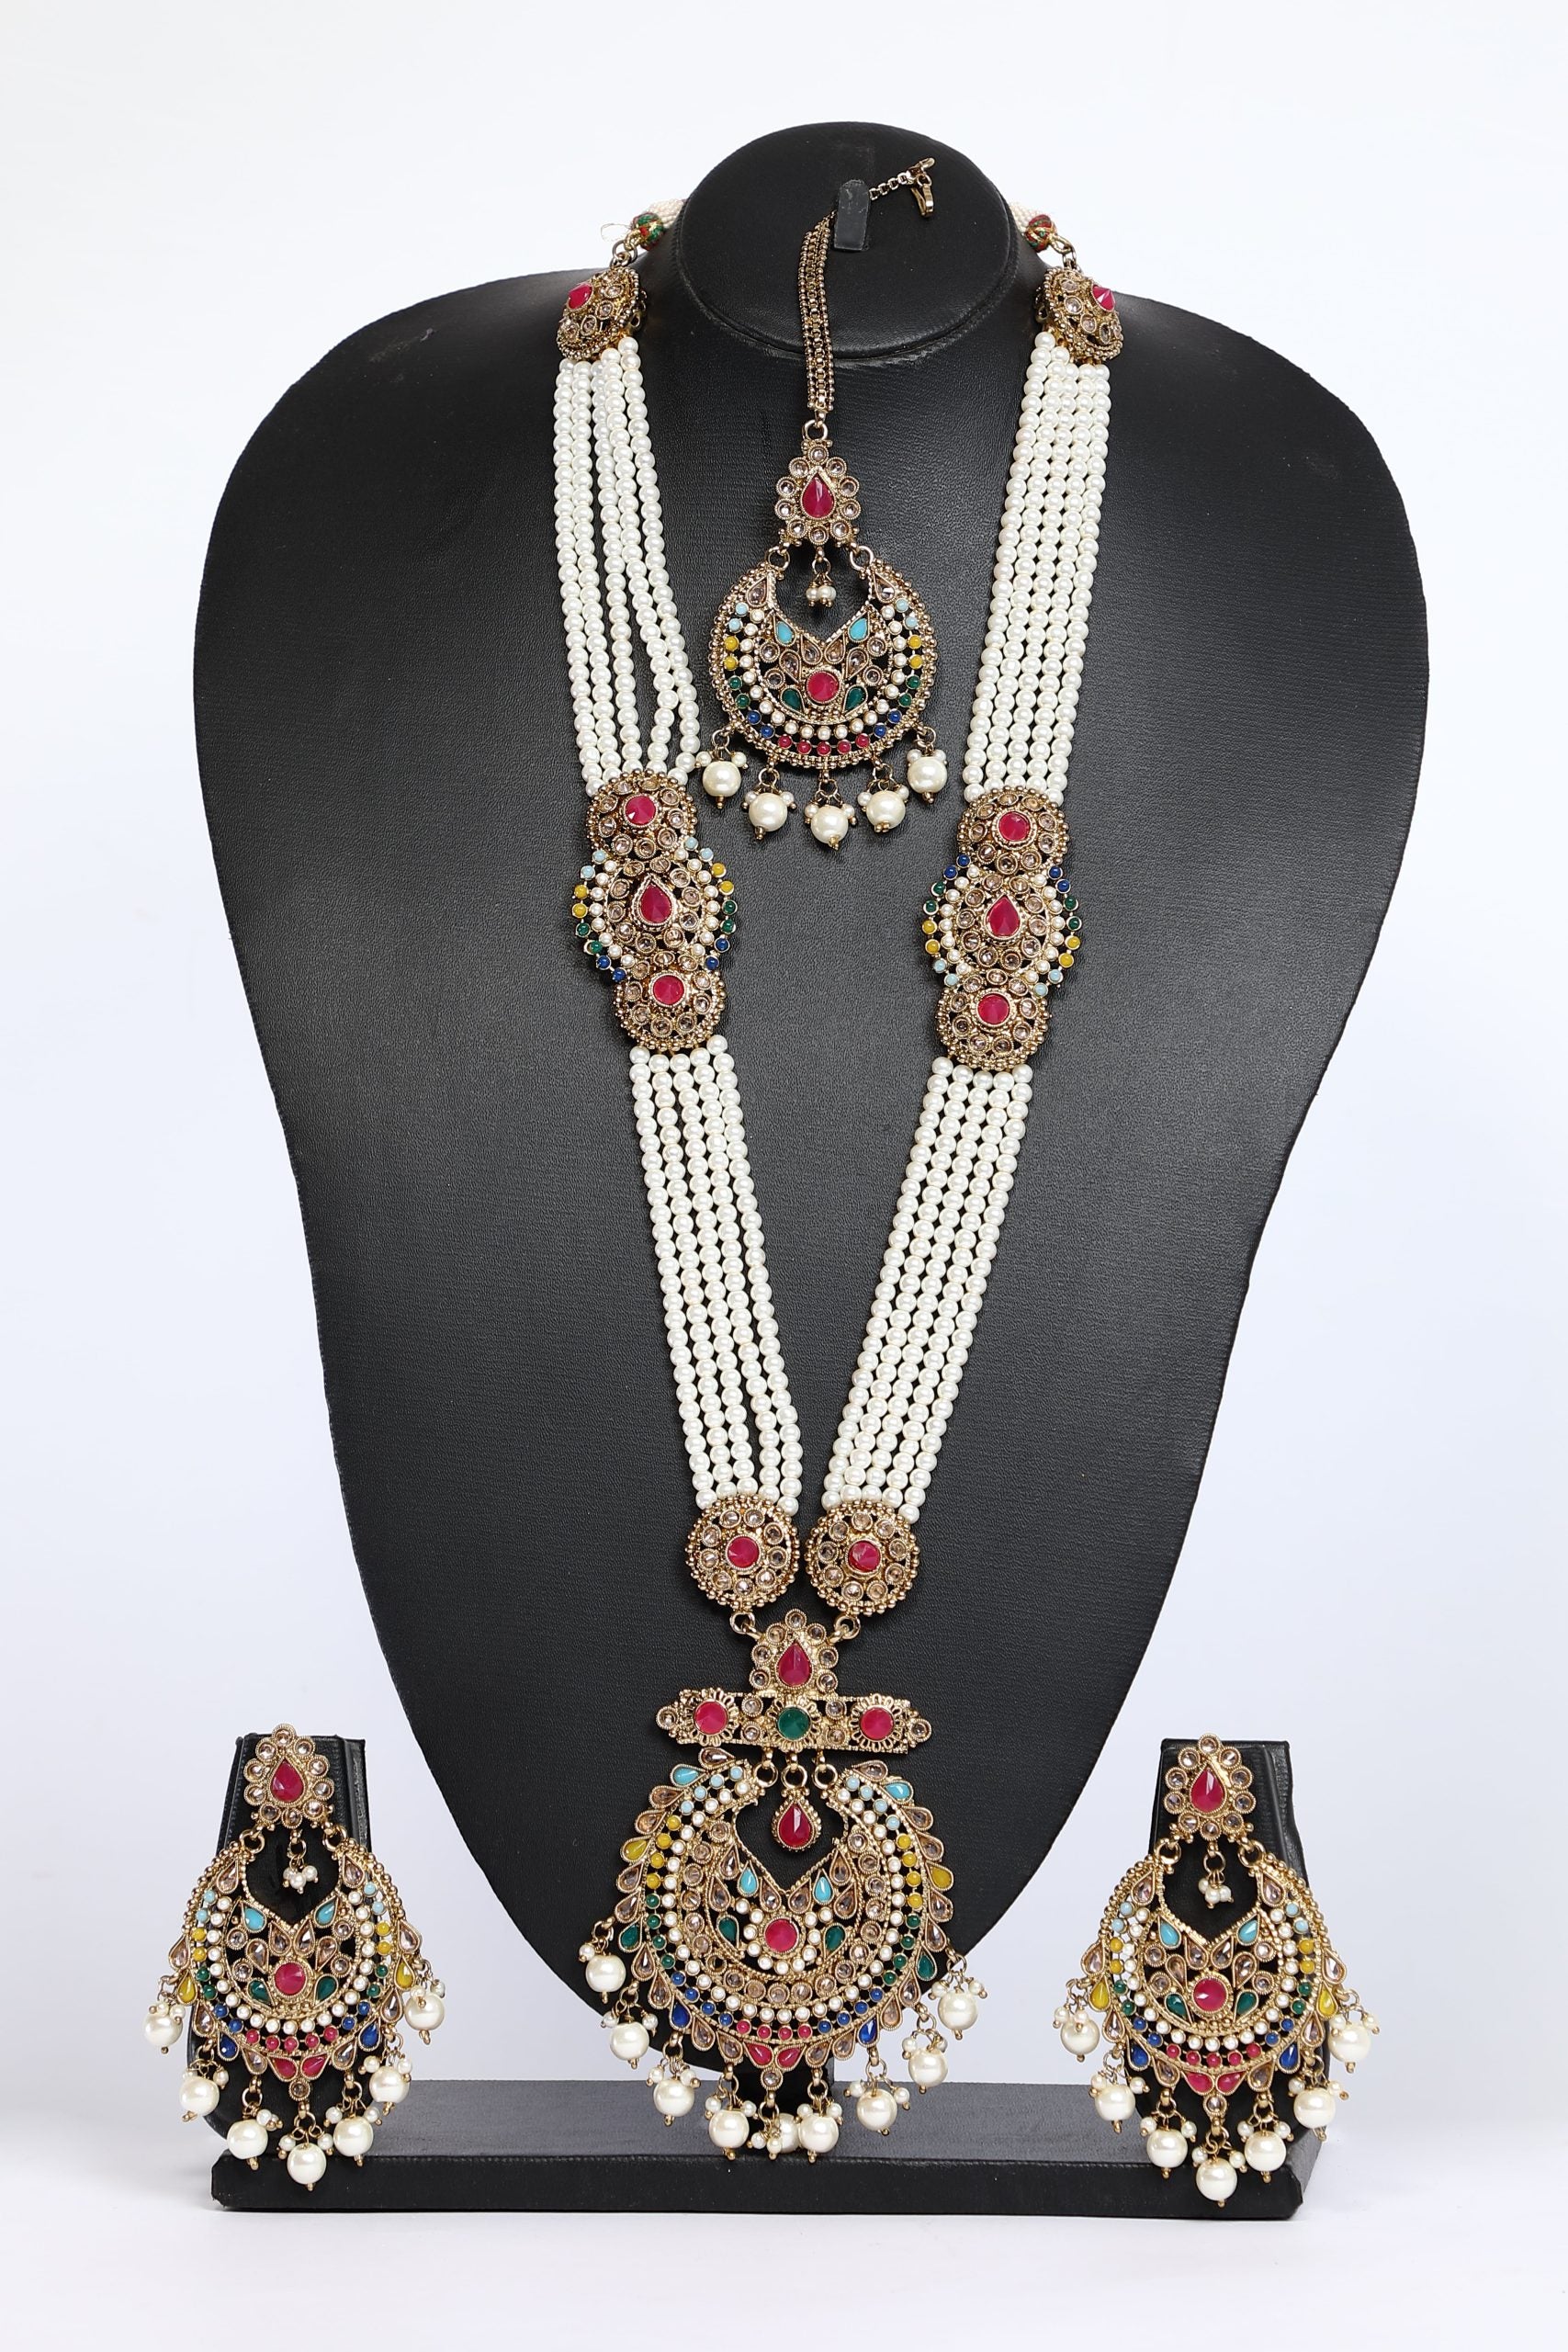 Beaded Heavy Long Necklace Set in White Color For Bridal – 3596